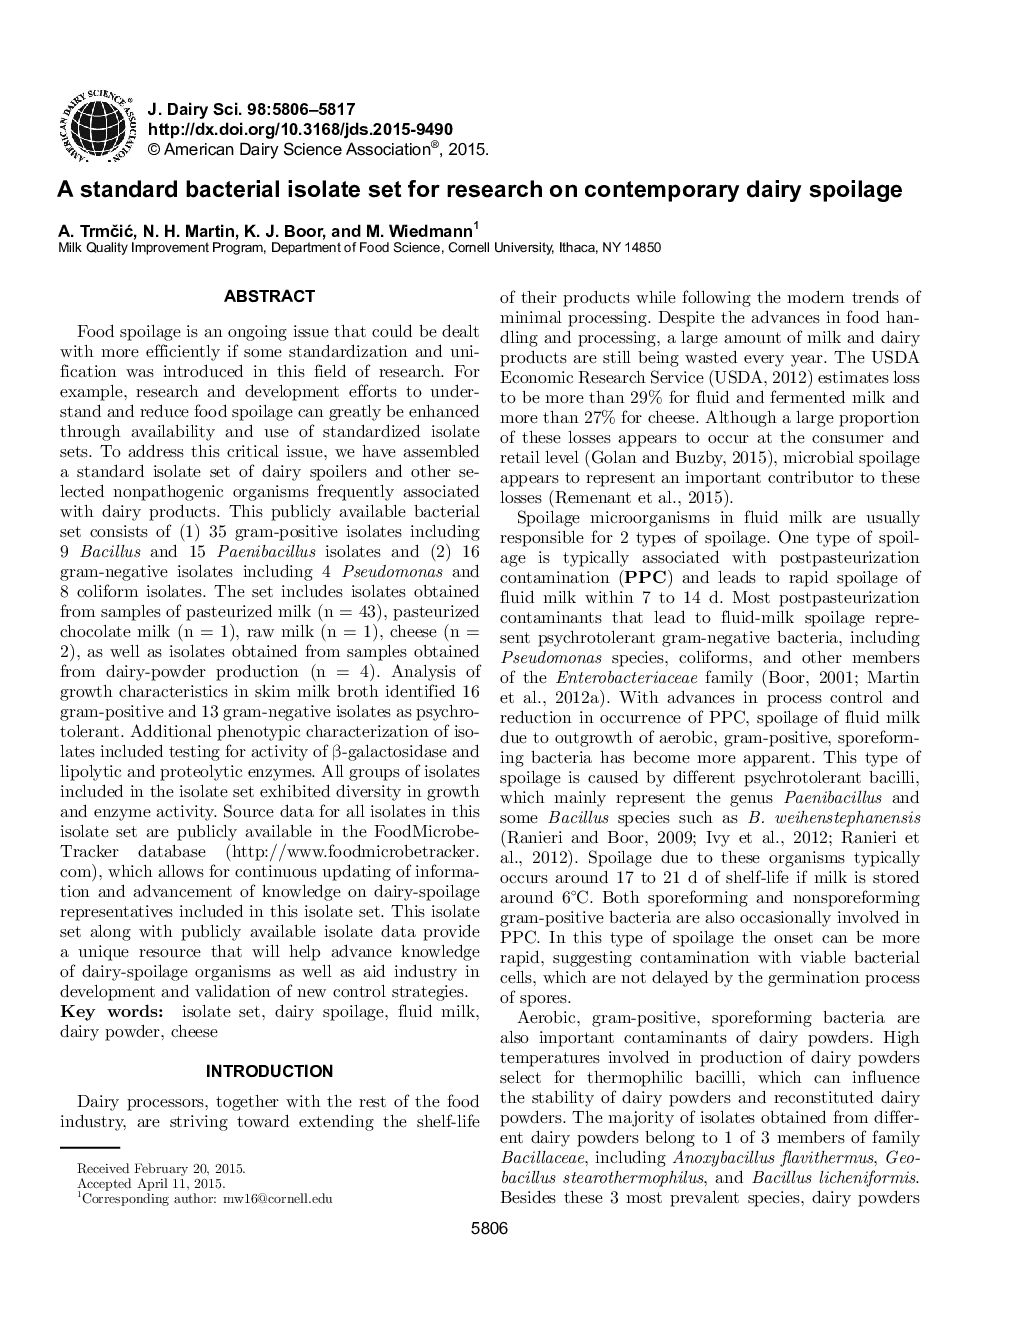 A standard bacterial isolate set for research on contemporary dairy spoilage